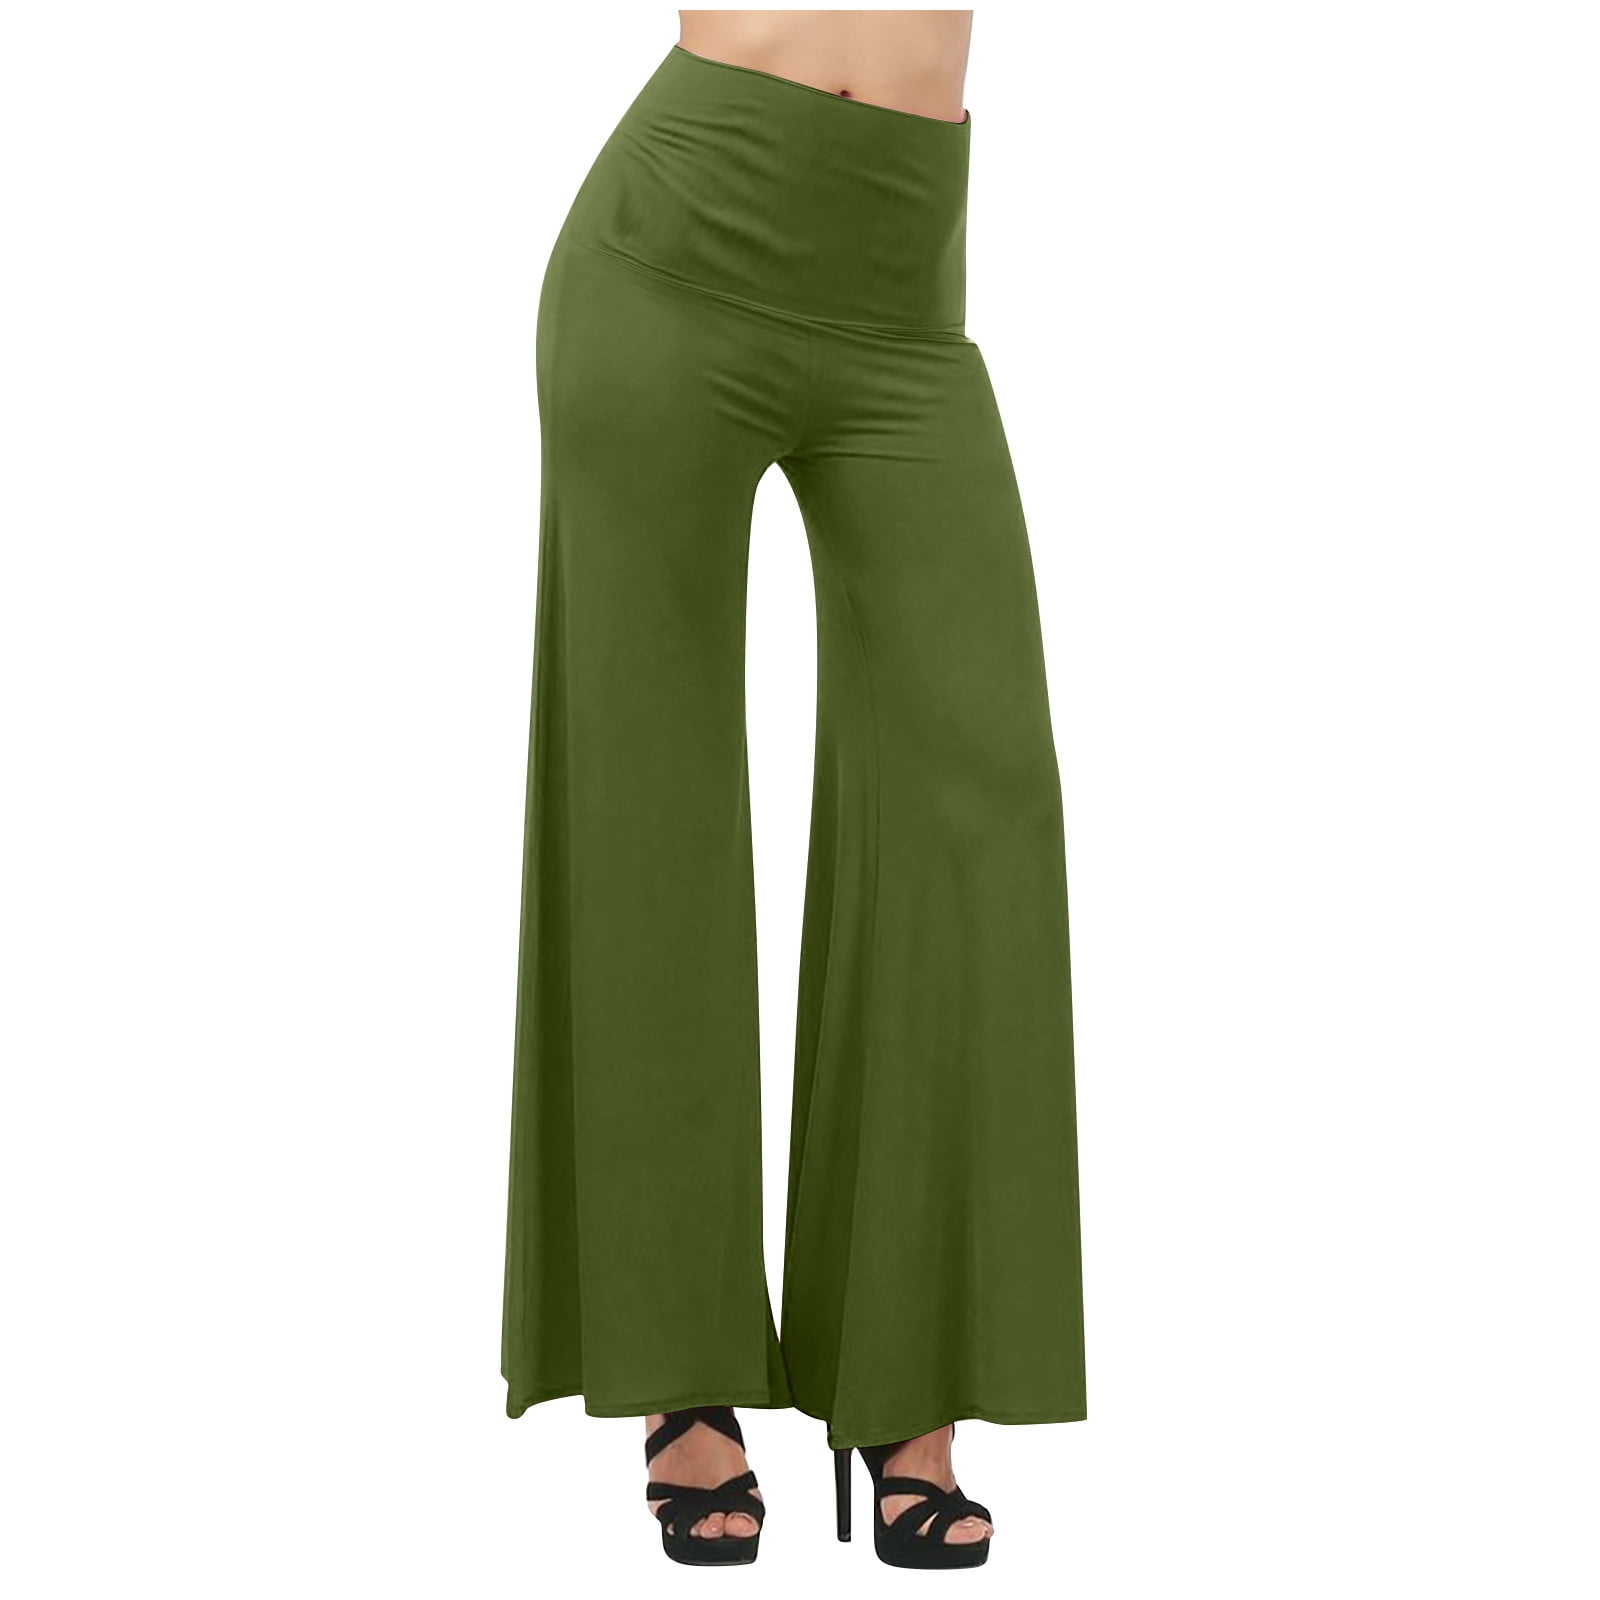 SFMZCM Black Suit Pants Women's Summer High-waisted Straight Trousers Loose  and Thin Temperament Foot Cigarette Pants (Color : White-style, Size : M  code): Buy Online at Best Price in UAE - Amazon.ae